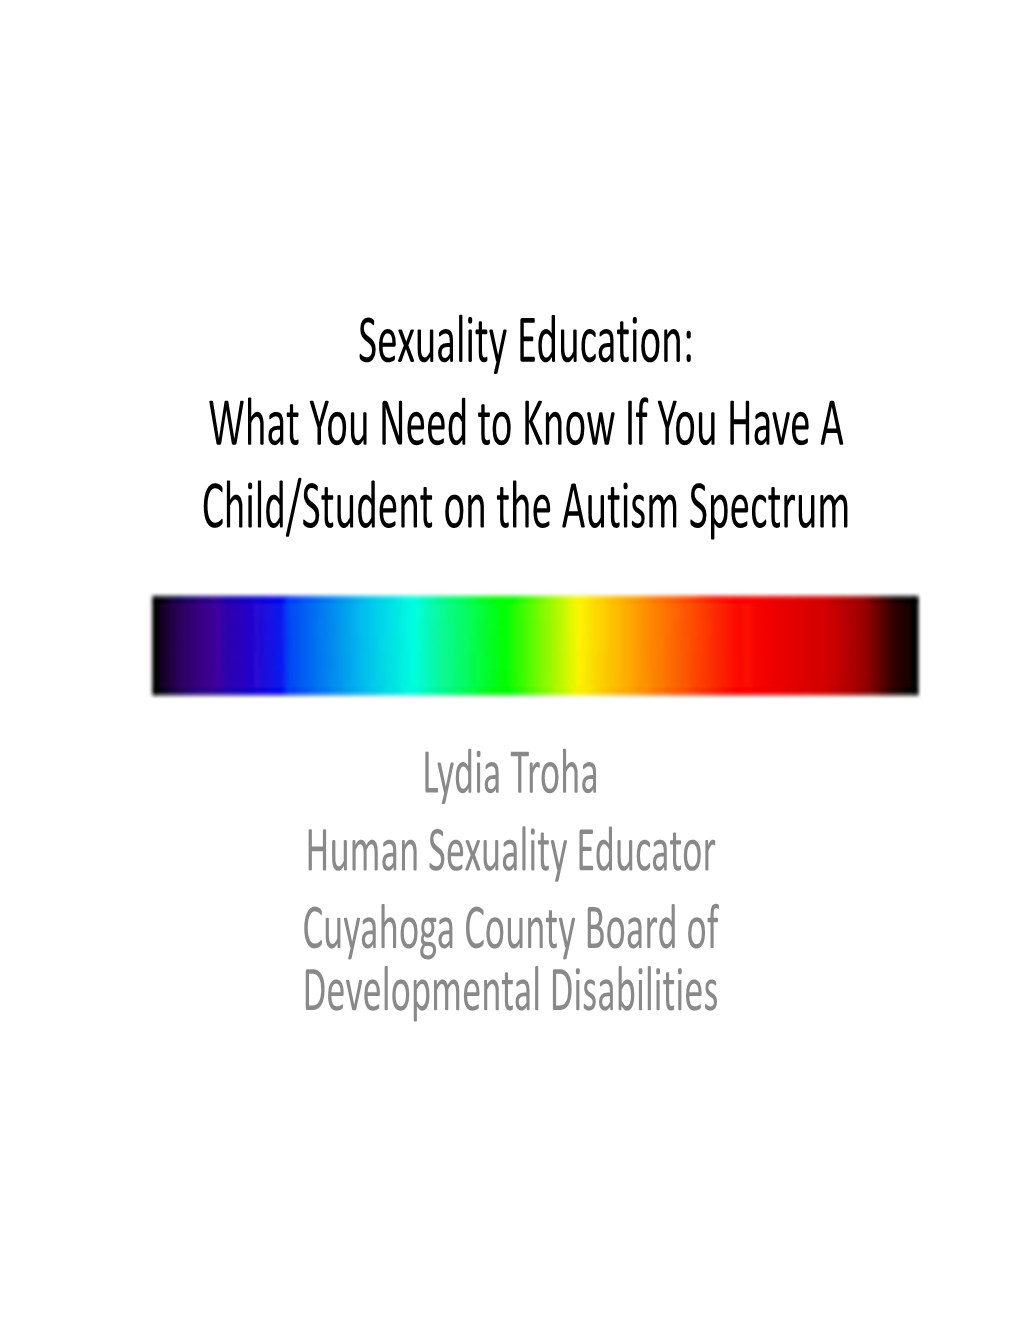 Sexuality Education: What You Need to Know If You Have a Child/Student on the Autism Spectrum